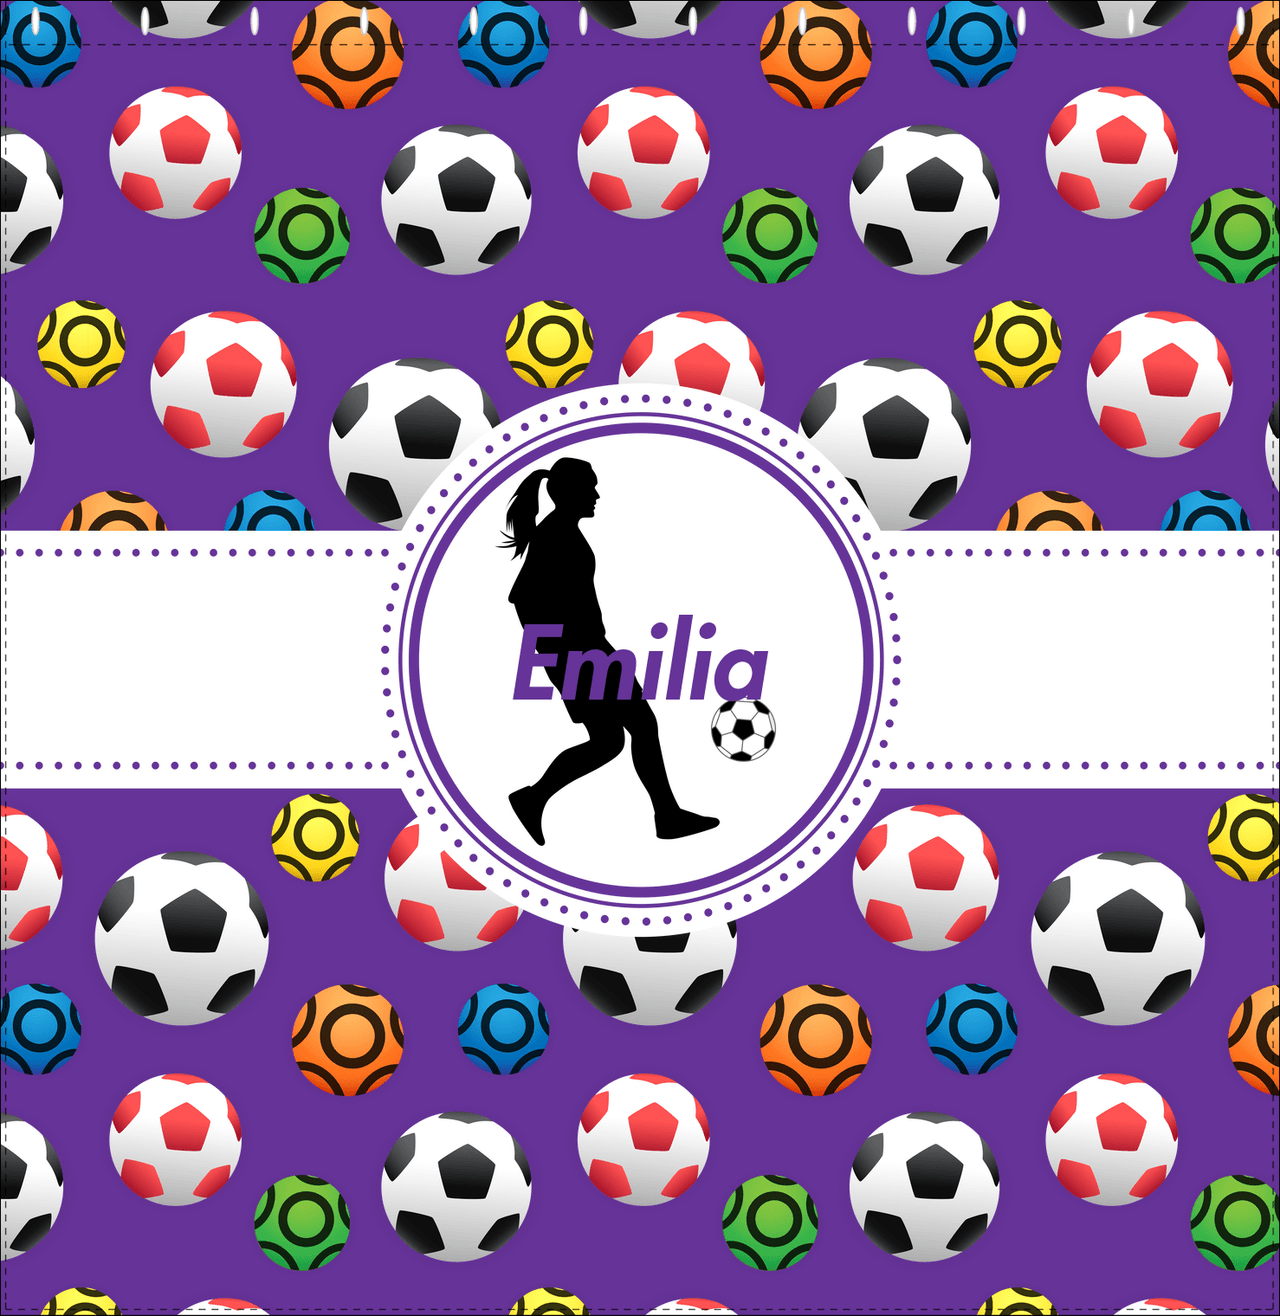 Personalized Soccer Shower Curtain XLVIII - Purple Background - Girl Silhouette V - Decorate View